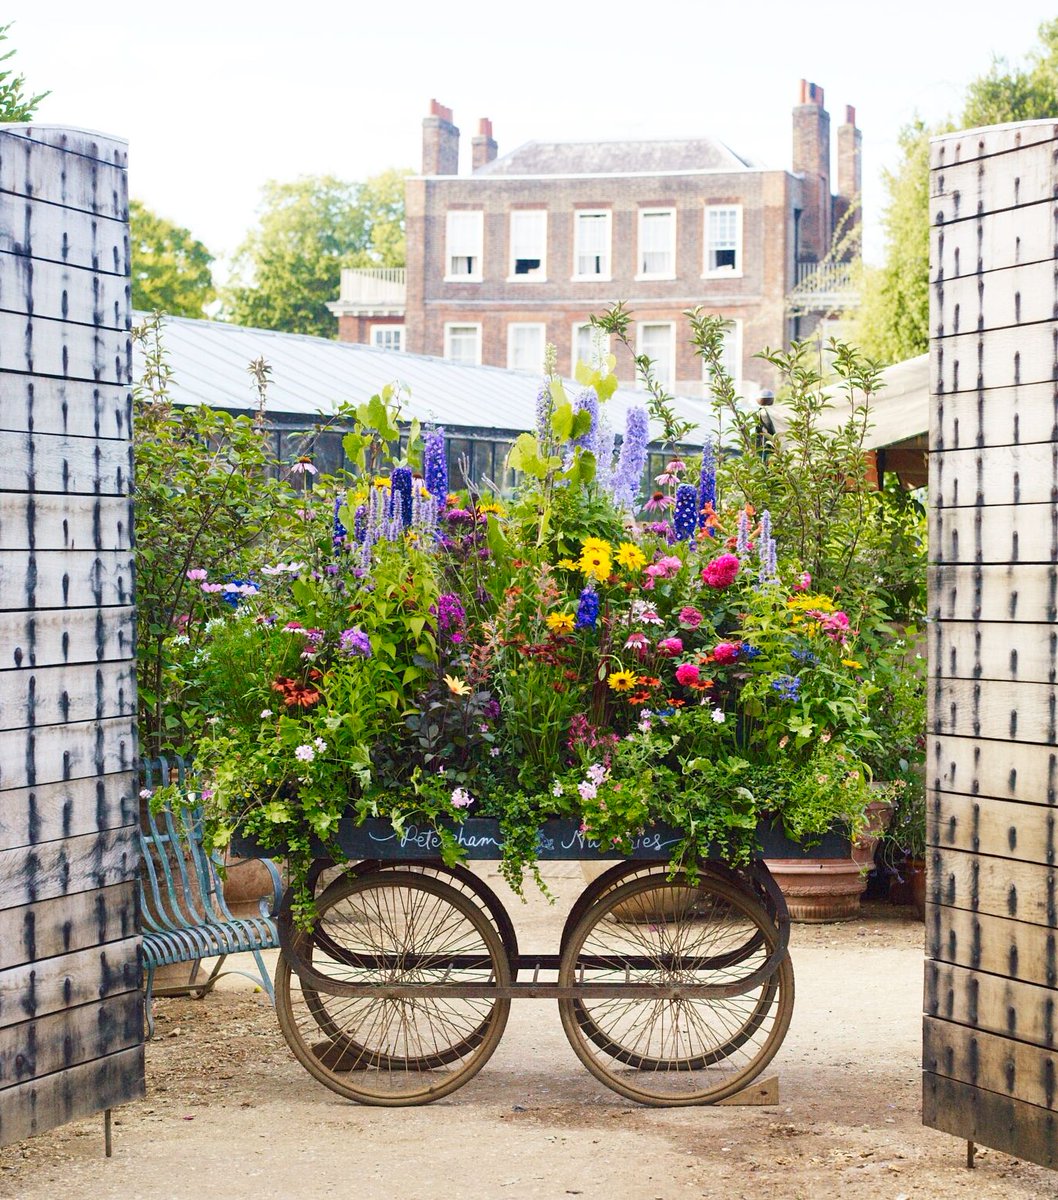 Today's the day! We are beyond excited to welcome you back to Petersham Nurseries Richmond and Covent Garden. We are open everyday this week at both sites to celebrate, so do pop in - we can't wait to see you.